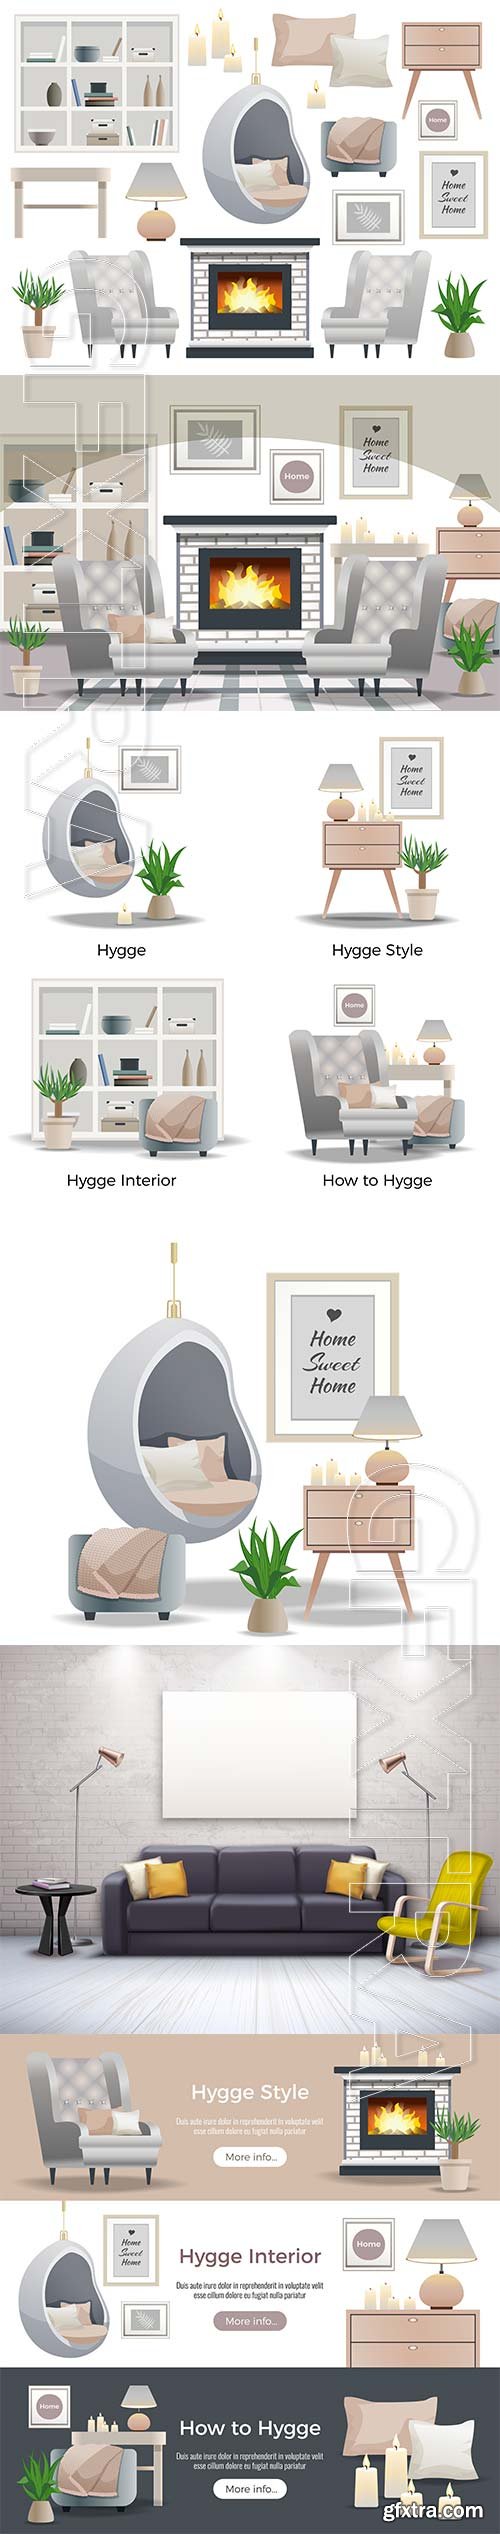 Hygge style interior isometric design element vector collection